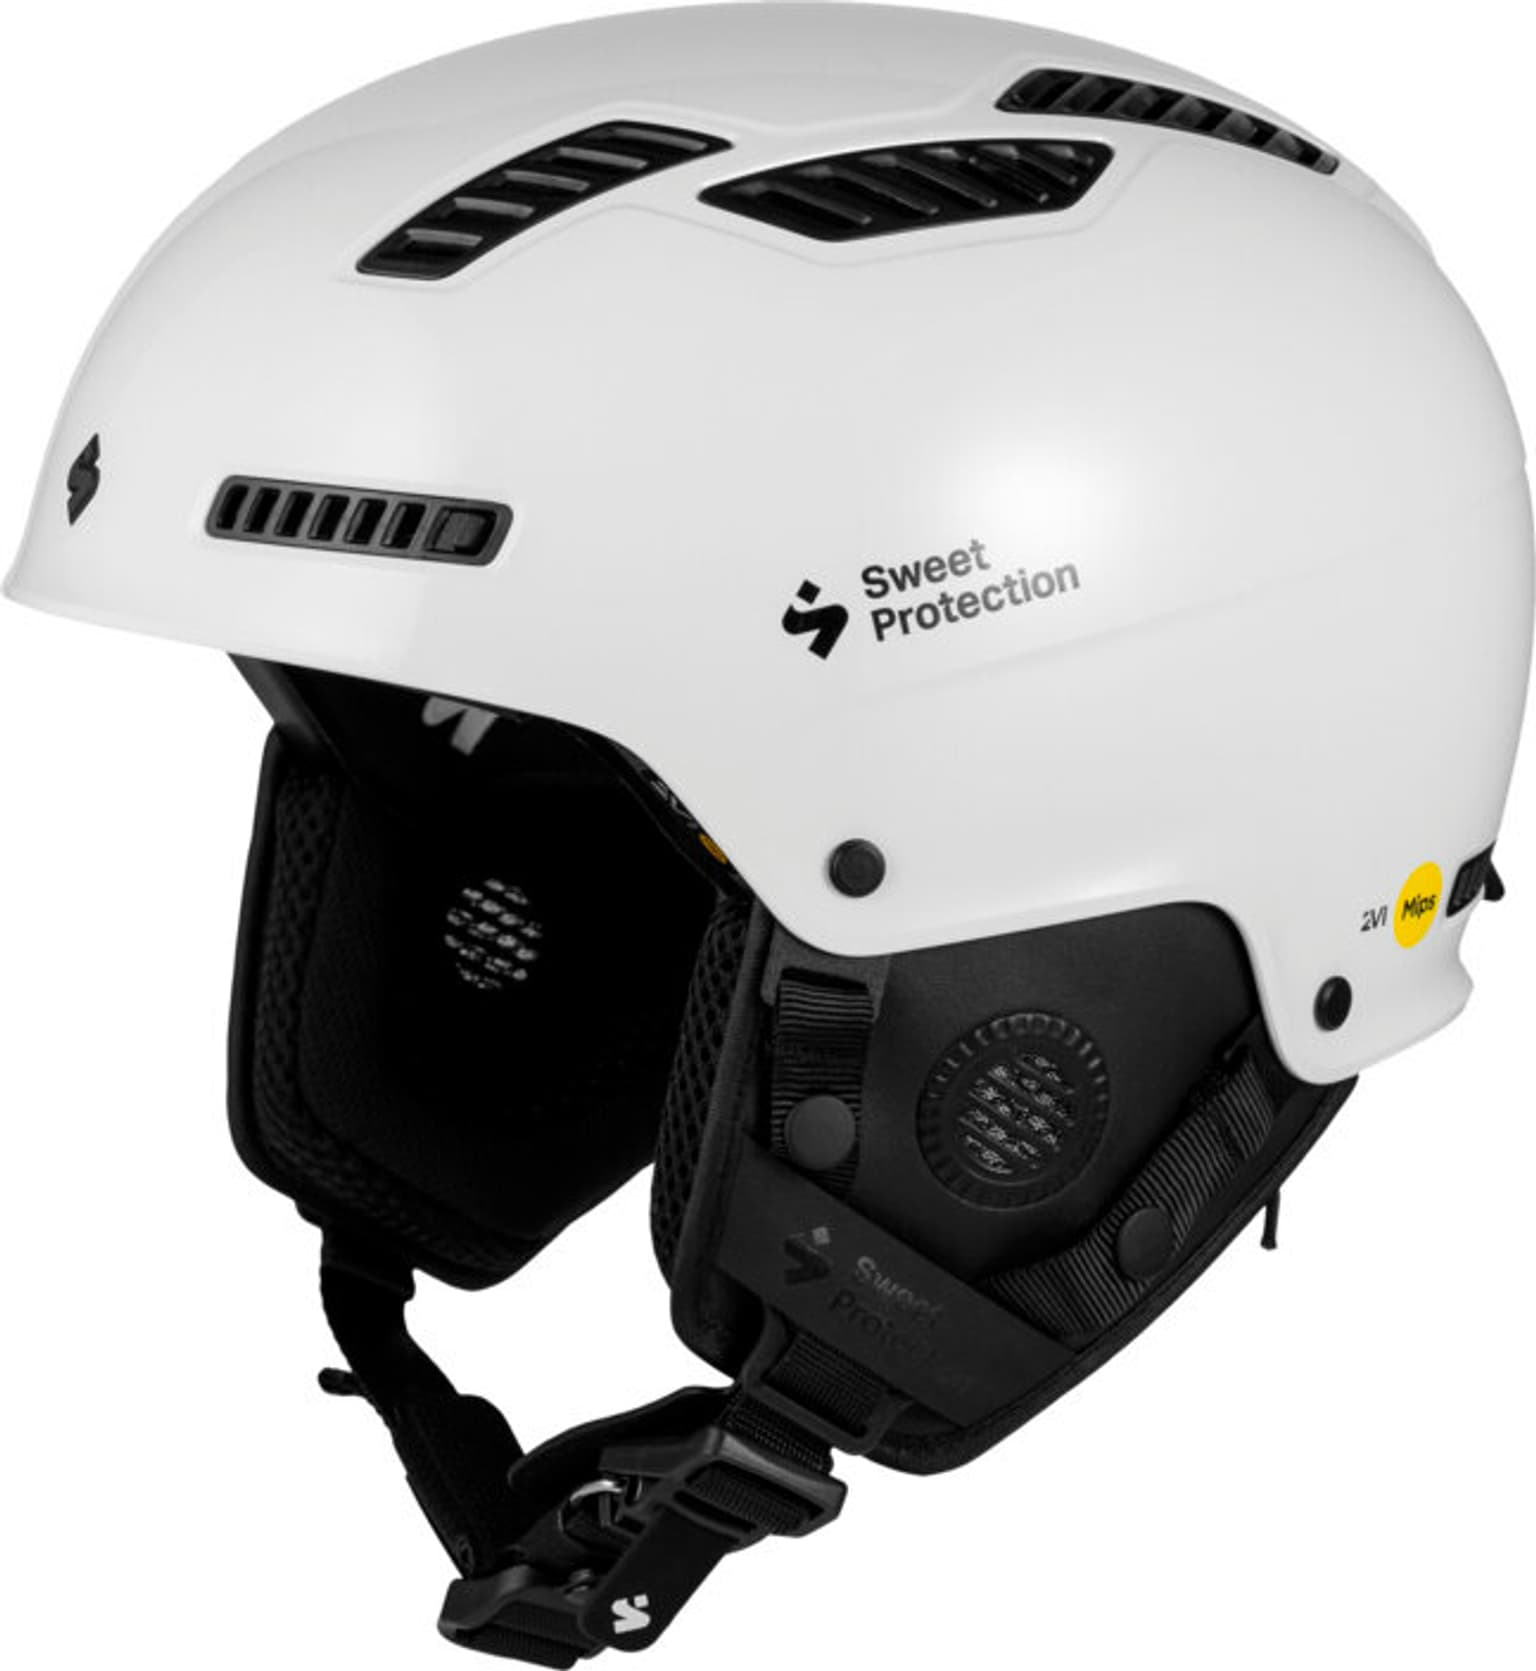 Sweet Protection Sweet Protection Igniter 2Vi MIPS Casque de ski blanc 1